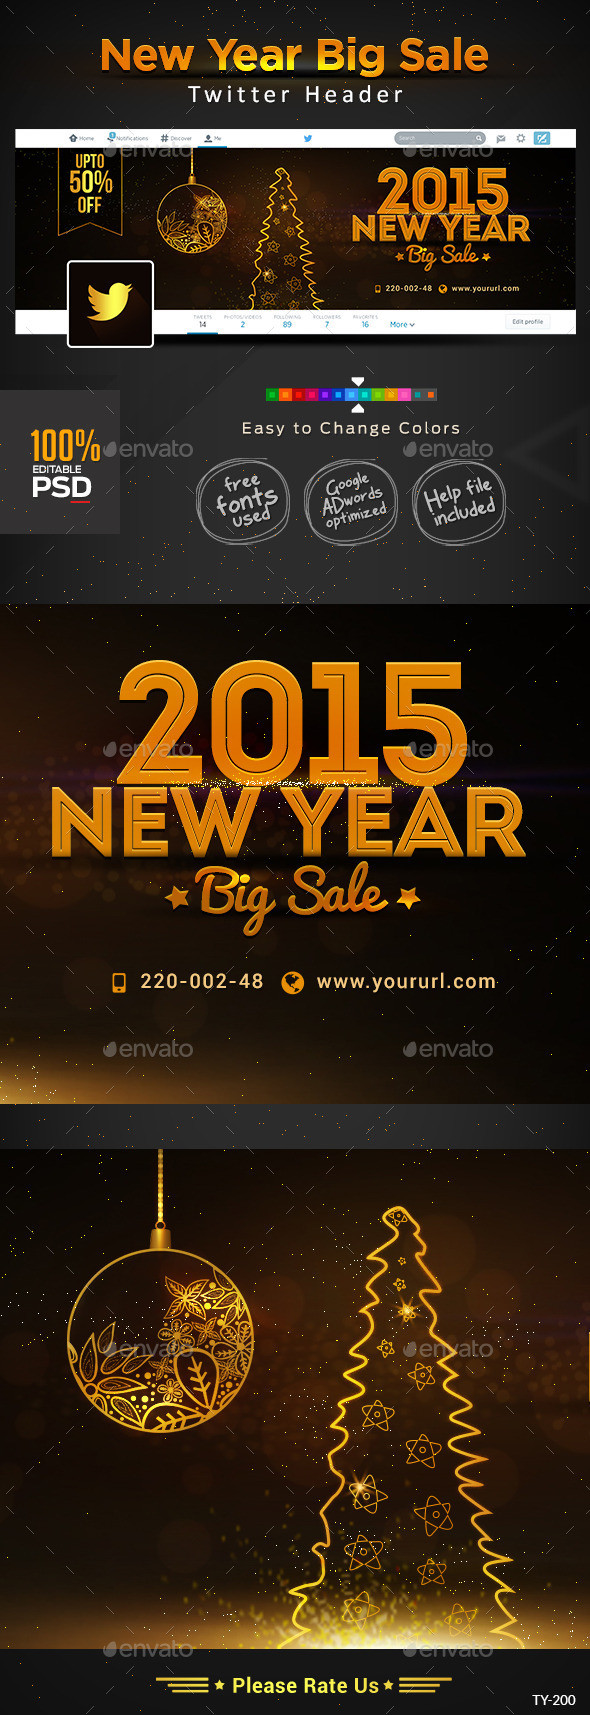 Gr ty 200 new 20year 20big 20sale 20twitter preview